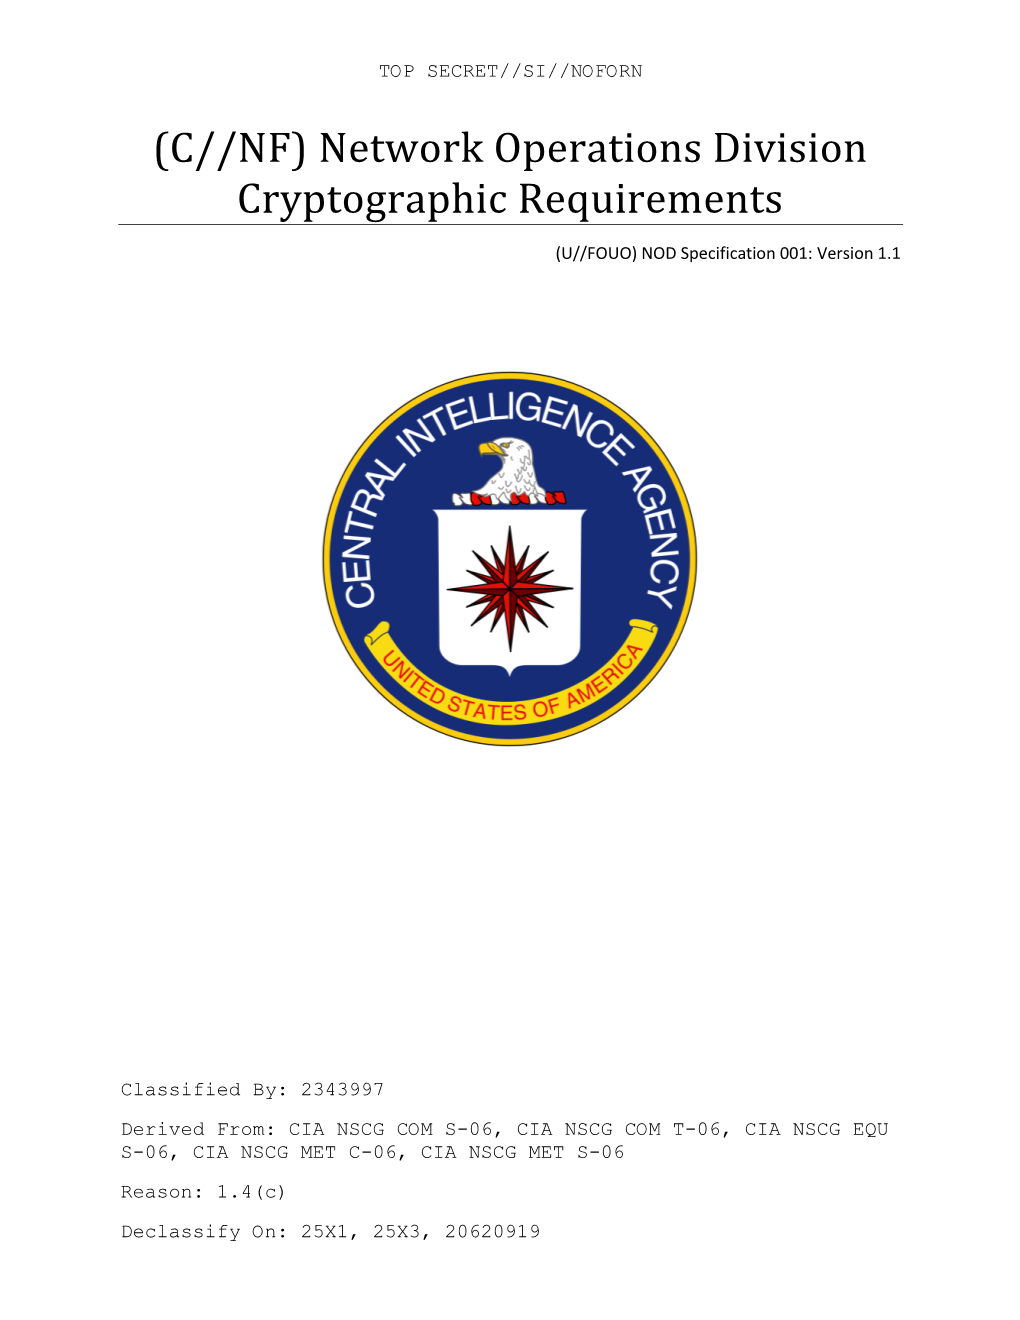 (C//NF) Network Operations Division Cryptographic Requirements